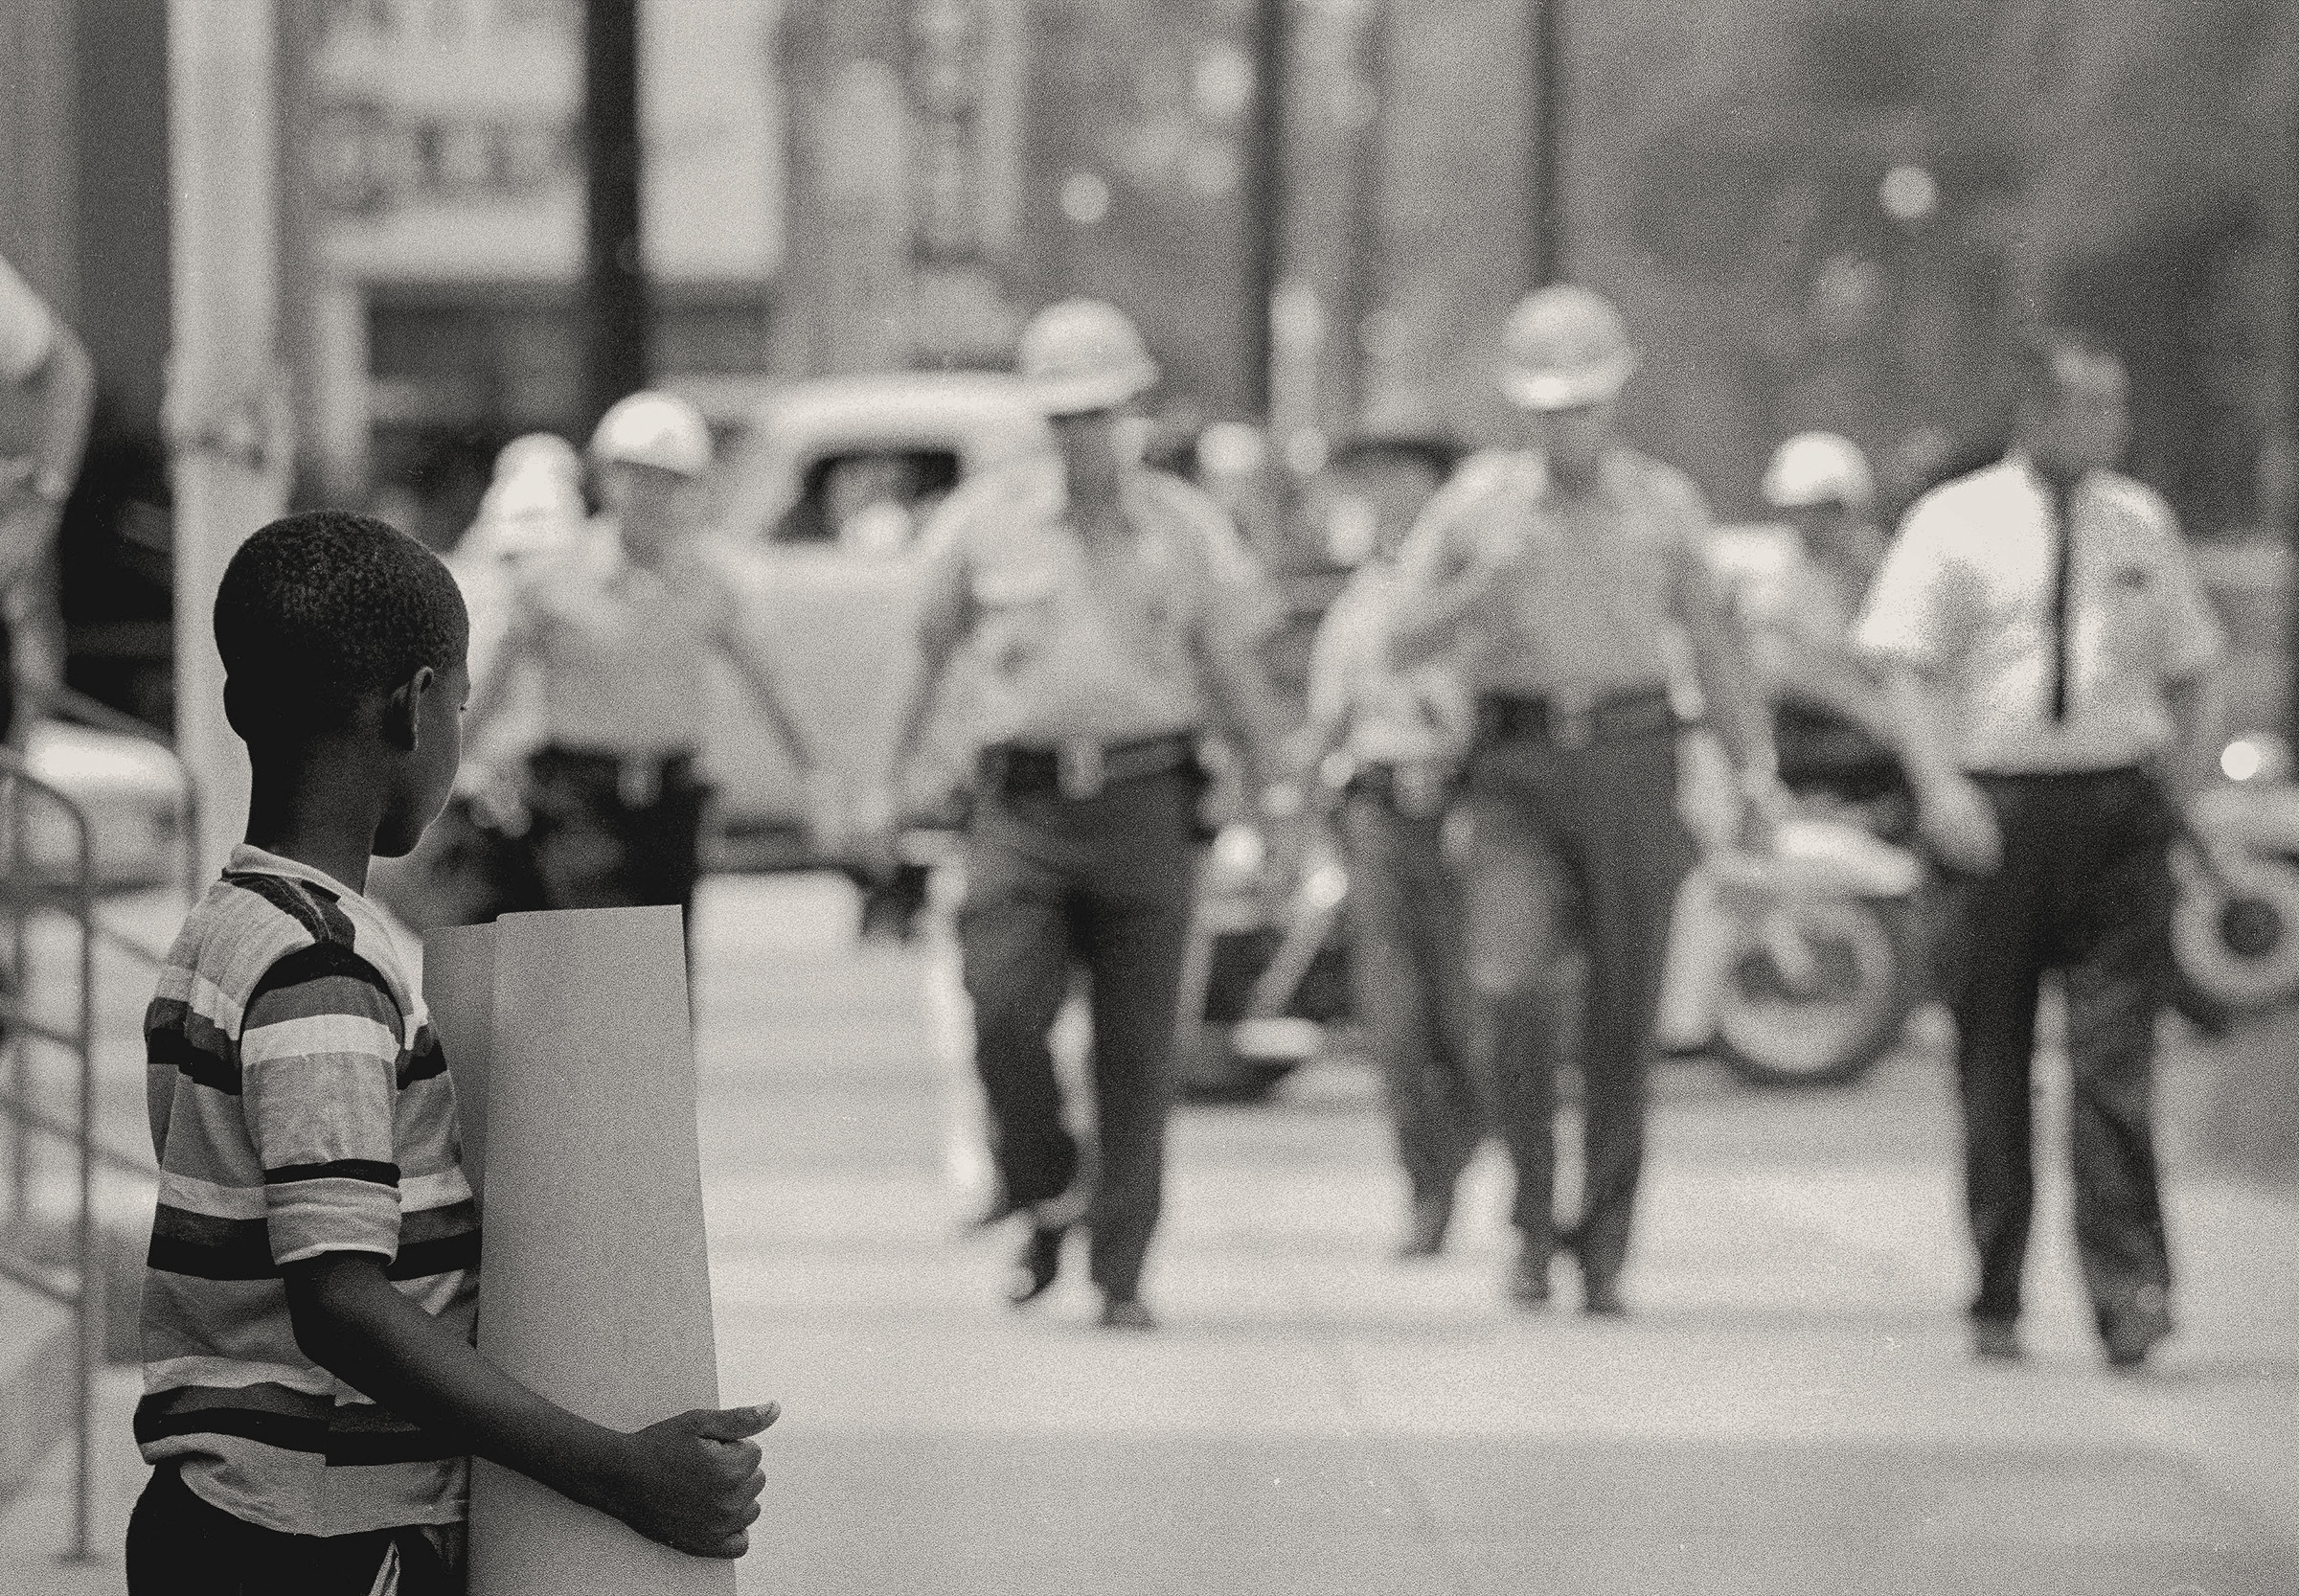 Deputies Approach Boy, Selma, Alabama, 1964. Photograph by Matt Herron. Sheriff's deputies coming to arrest a young boy holding a sign at a SNCC voter registration demonstration in front of the Dallas County courthouse. © 1976, Matt Herron / Photograph provided by TakeStock.